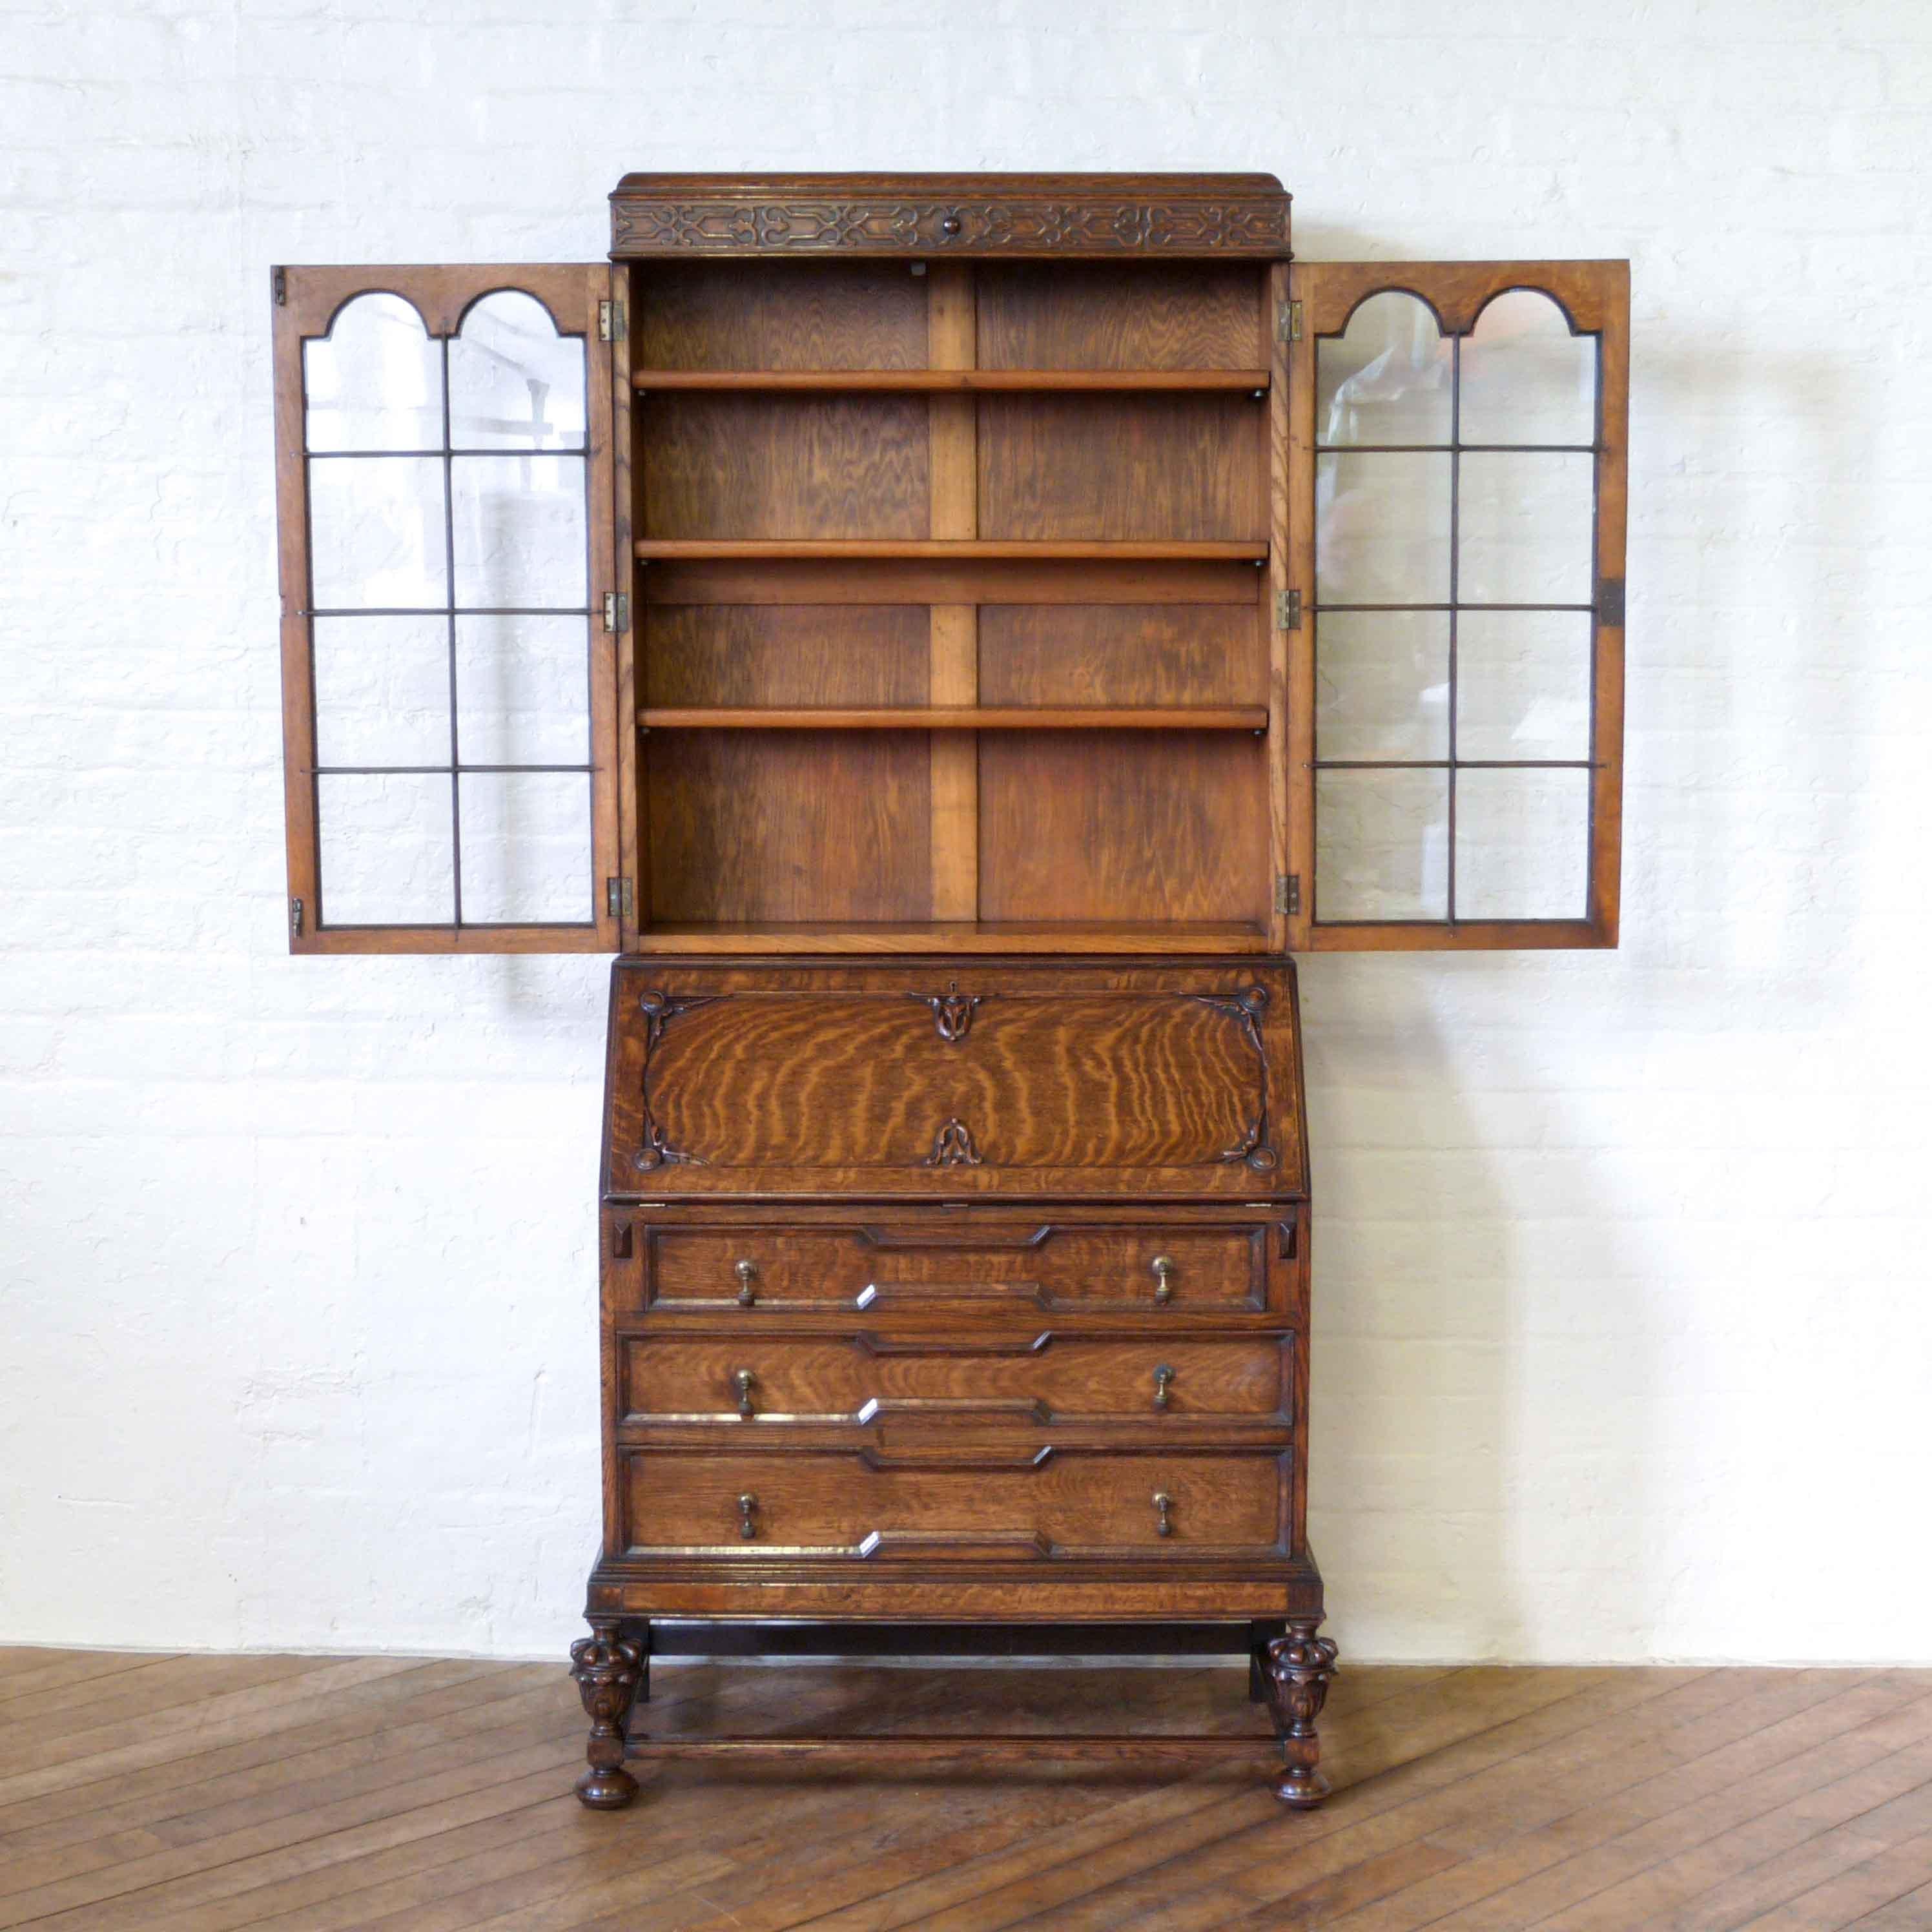 A beautiful quality solid oak bureau bookcase with a marvellous cantilever interior. The geometric mouldings to the drawers are typical of a mid-17th century Jacobean design, as are the carved baluster legs. The astragal glazed bookcase top splits